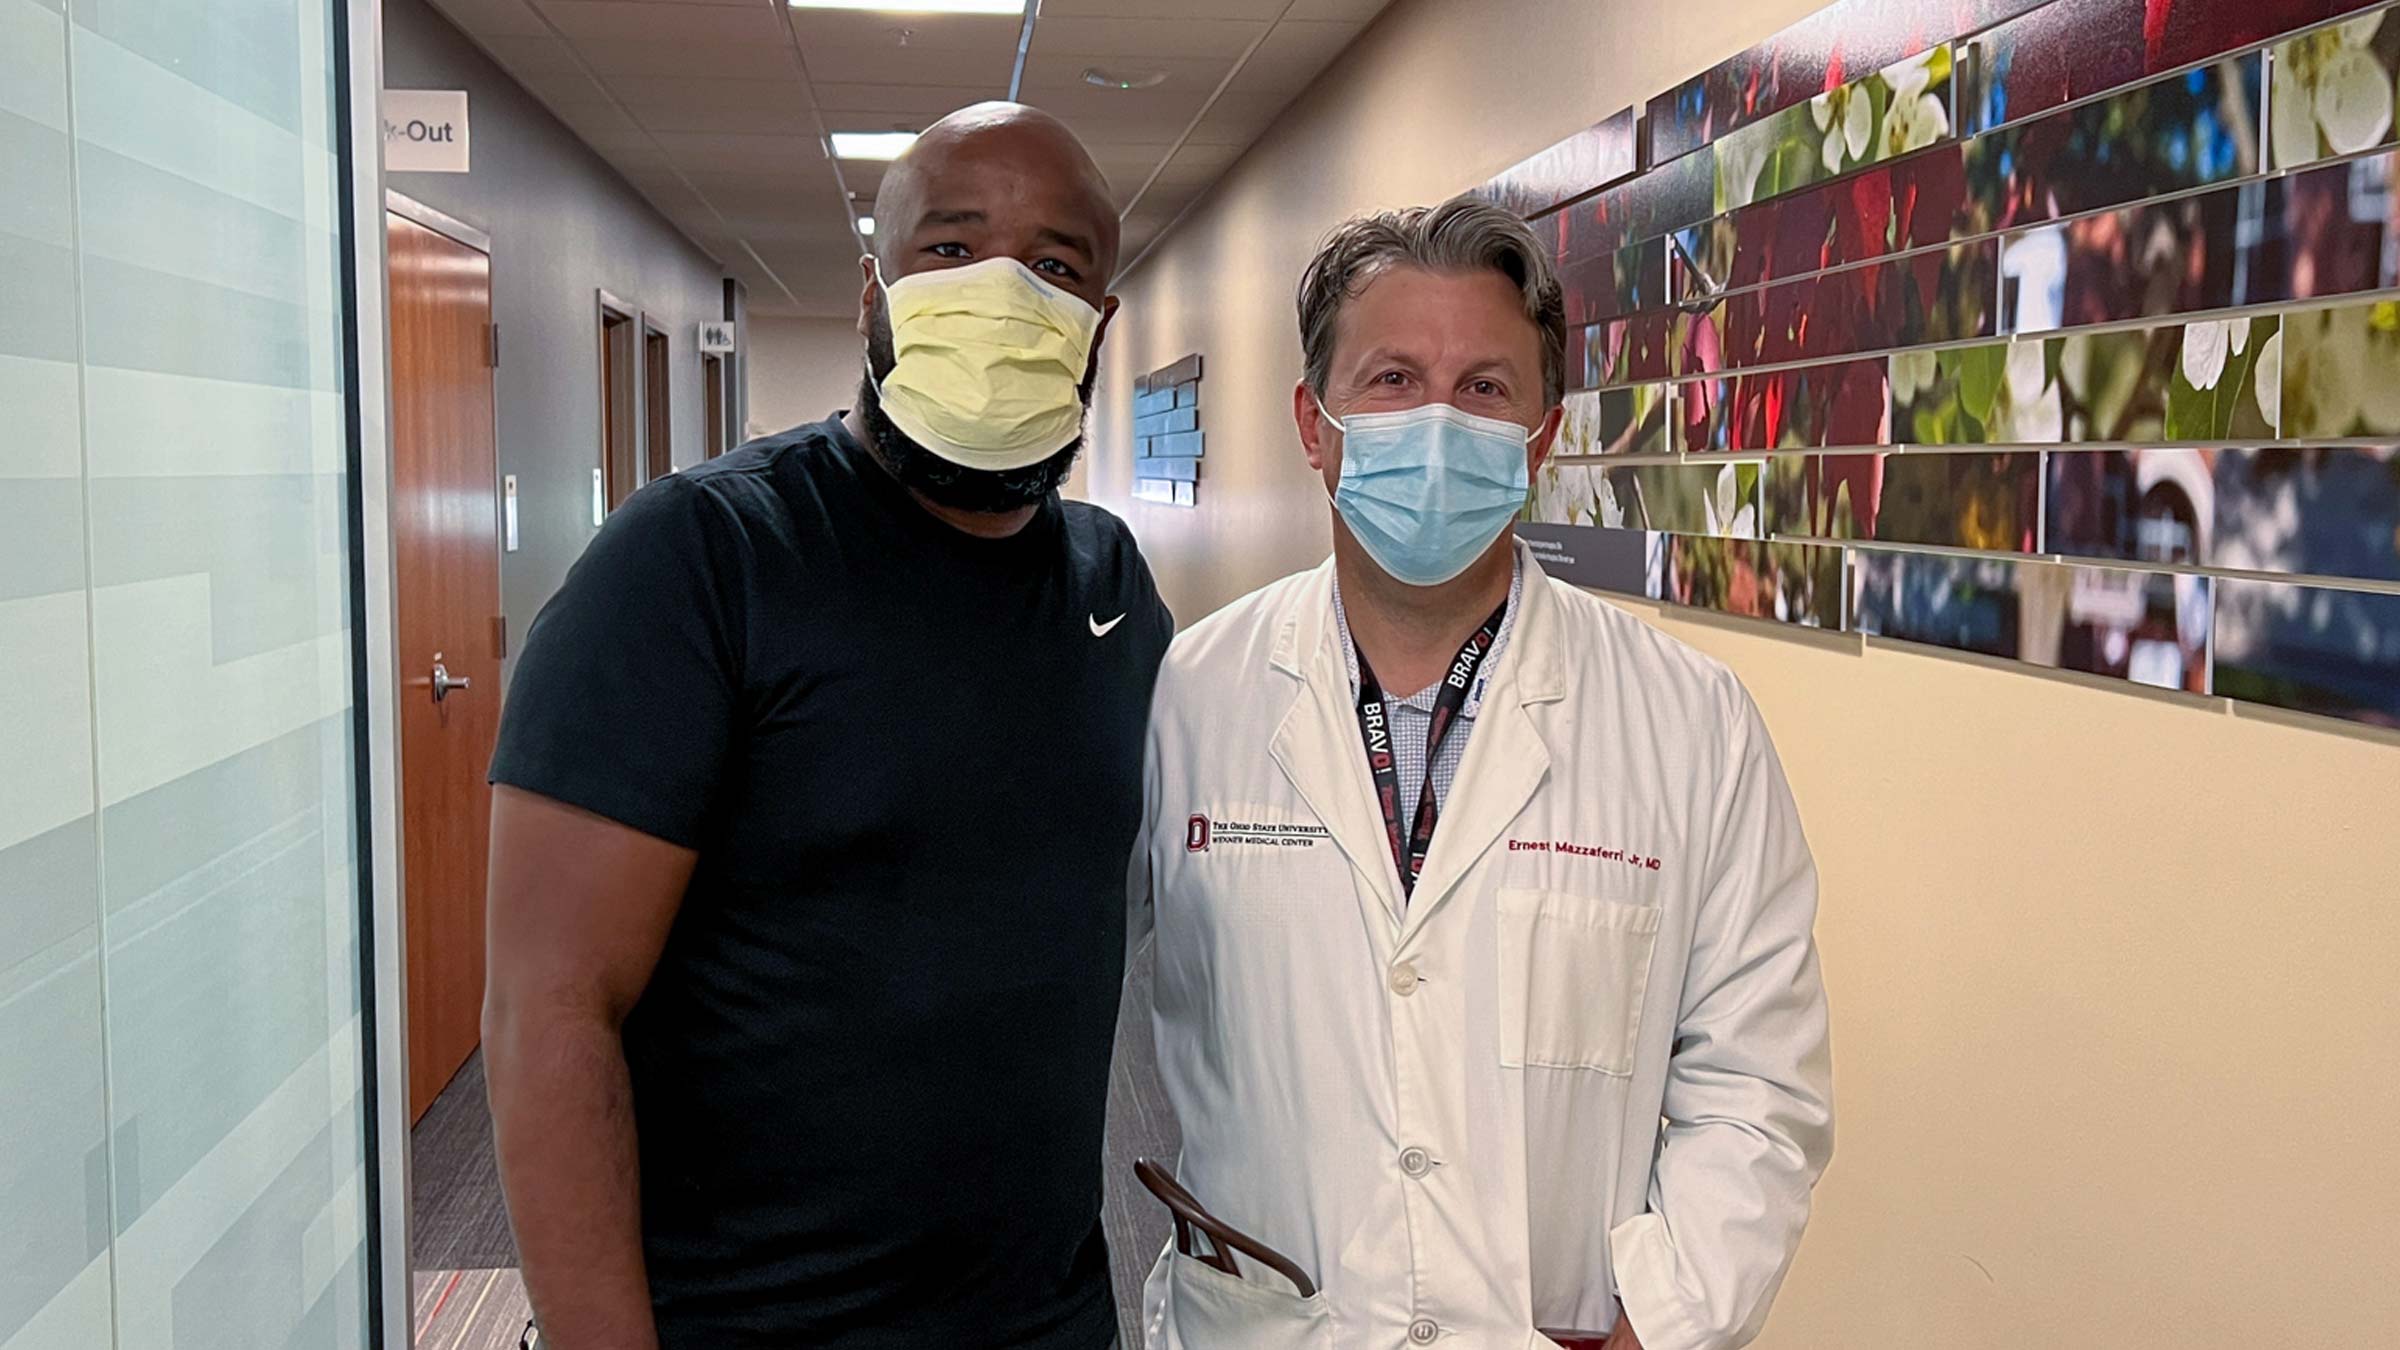 Dr. Mazaferri and coronary artery disease patient, Marcus Wright